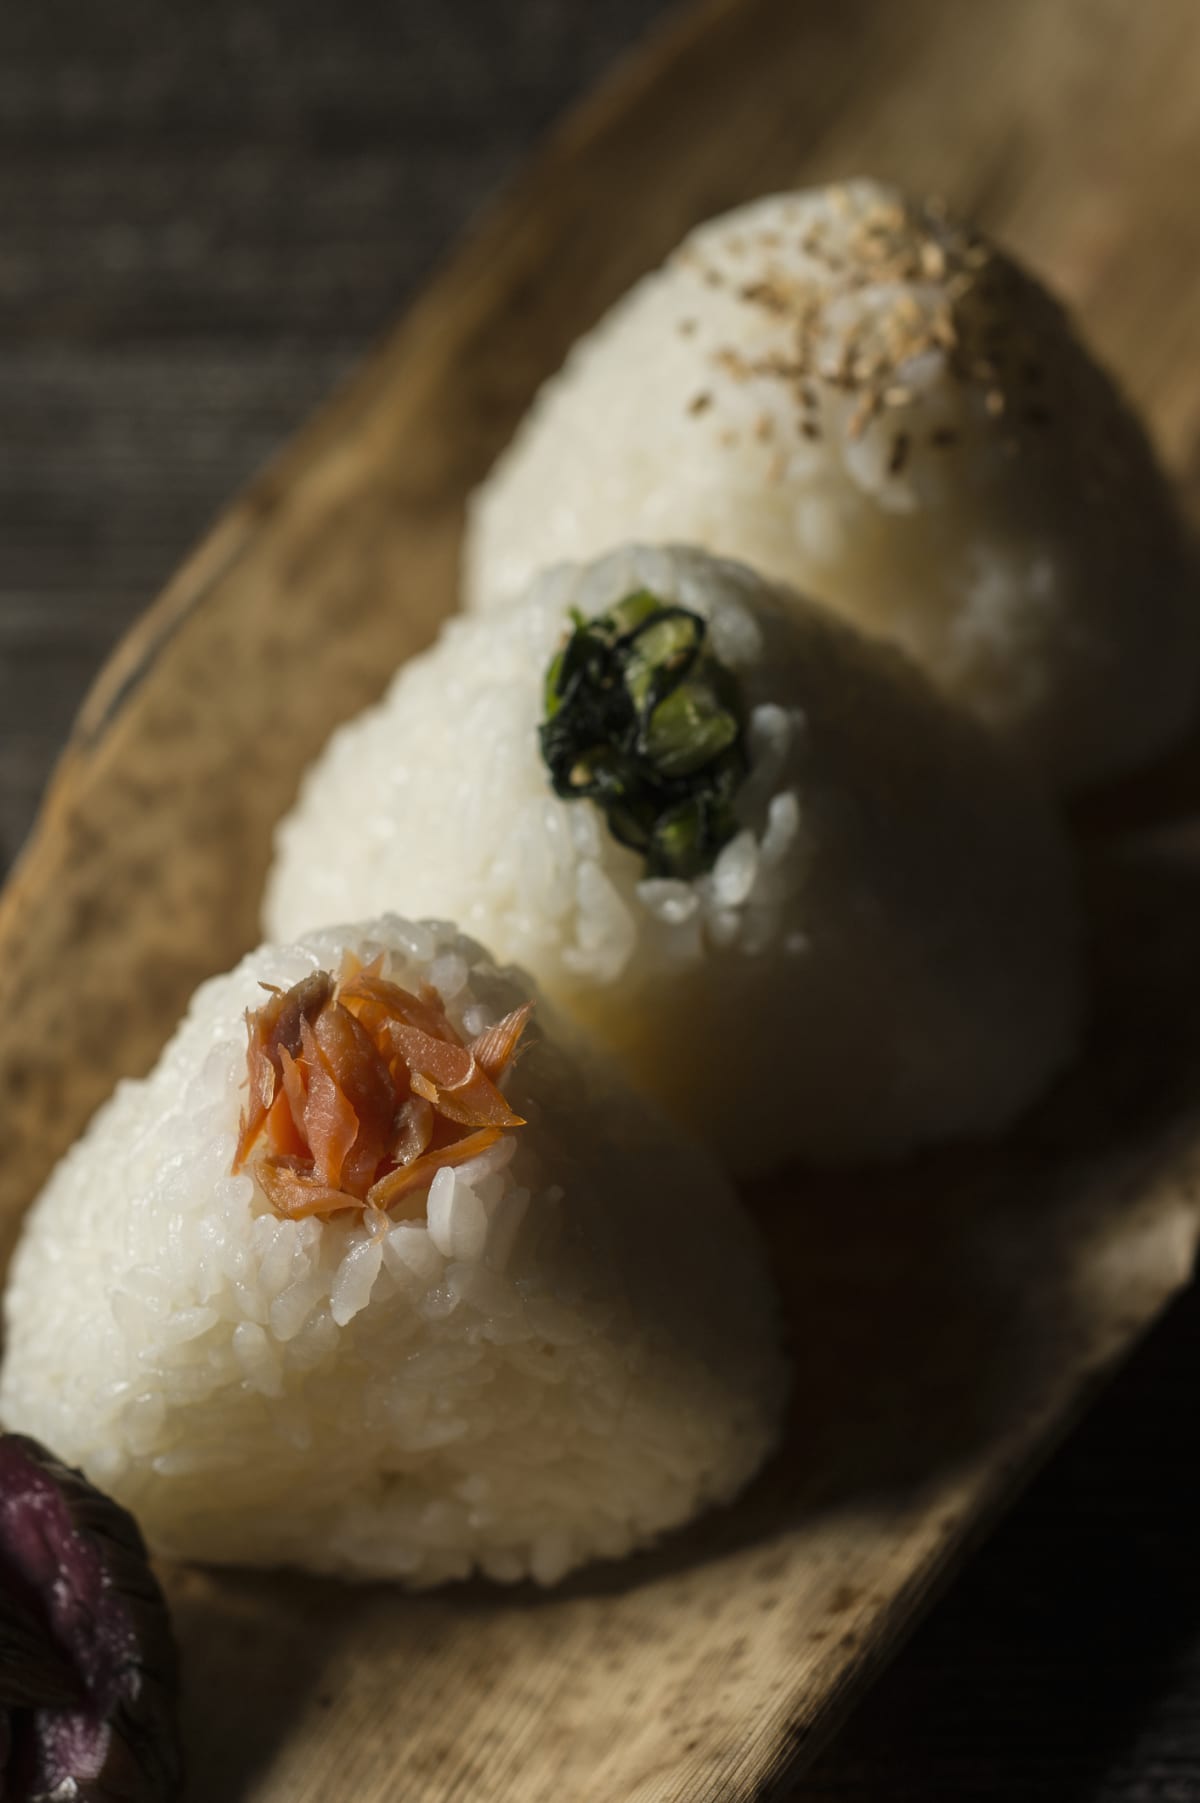 Rice balls are made by grasping rice, Japan's own cuisine. As one of the way to eat rice, it is widely eaten in Japan today.